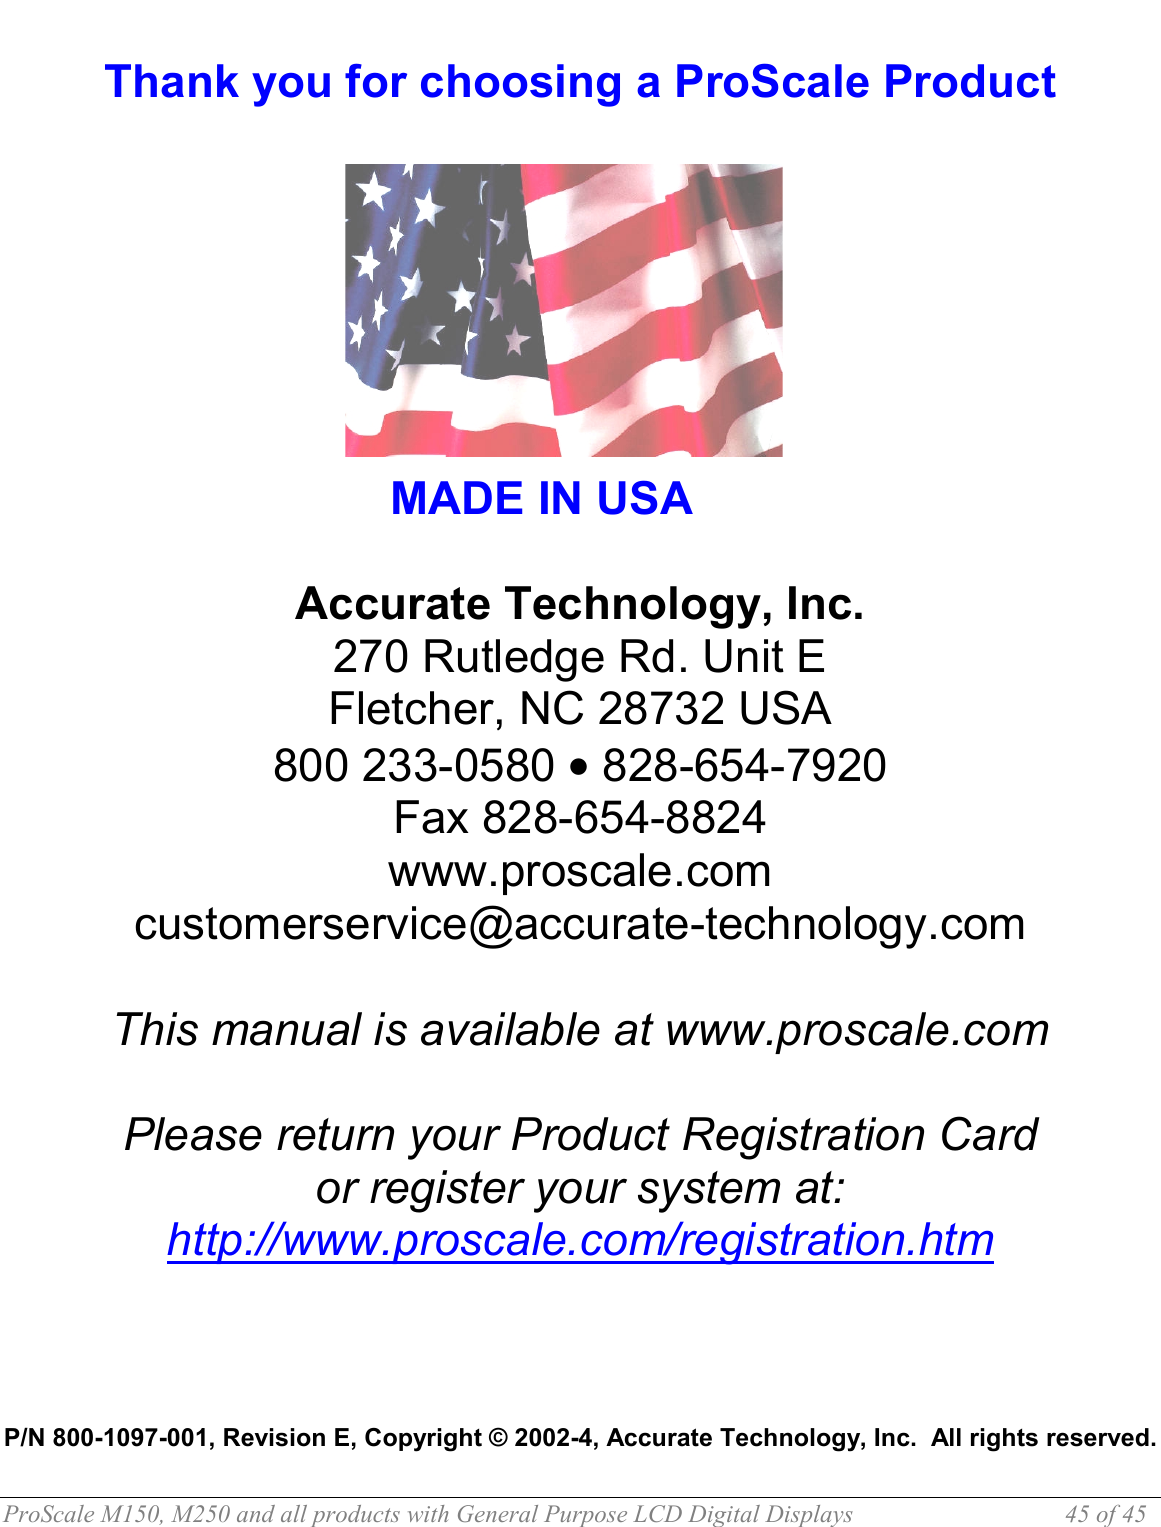  ProScale M150, M250 and all products with General Purpose LCD Digital Displays  45 of 45  Thank you for choosing a ProScale Product            MADE IN USA  Accurate Technology, Inc. 270 Rutledge Rd. Unit E Fletcher, NC 28732 USA 800 233-0580 • 828-654-7920 Fax 828-654-8824 www.proscale.com customerservice@accurate-technology.com  This manual is available at www.proscale.com  Please return your Product Registration Card or register your system at: http://www.proscale.com/registration.htm     P/N 800-1097-001, Revision E, Copyright © 2002-4, Accurate Technology, Inc.  All rights reserved. 